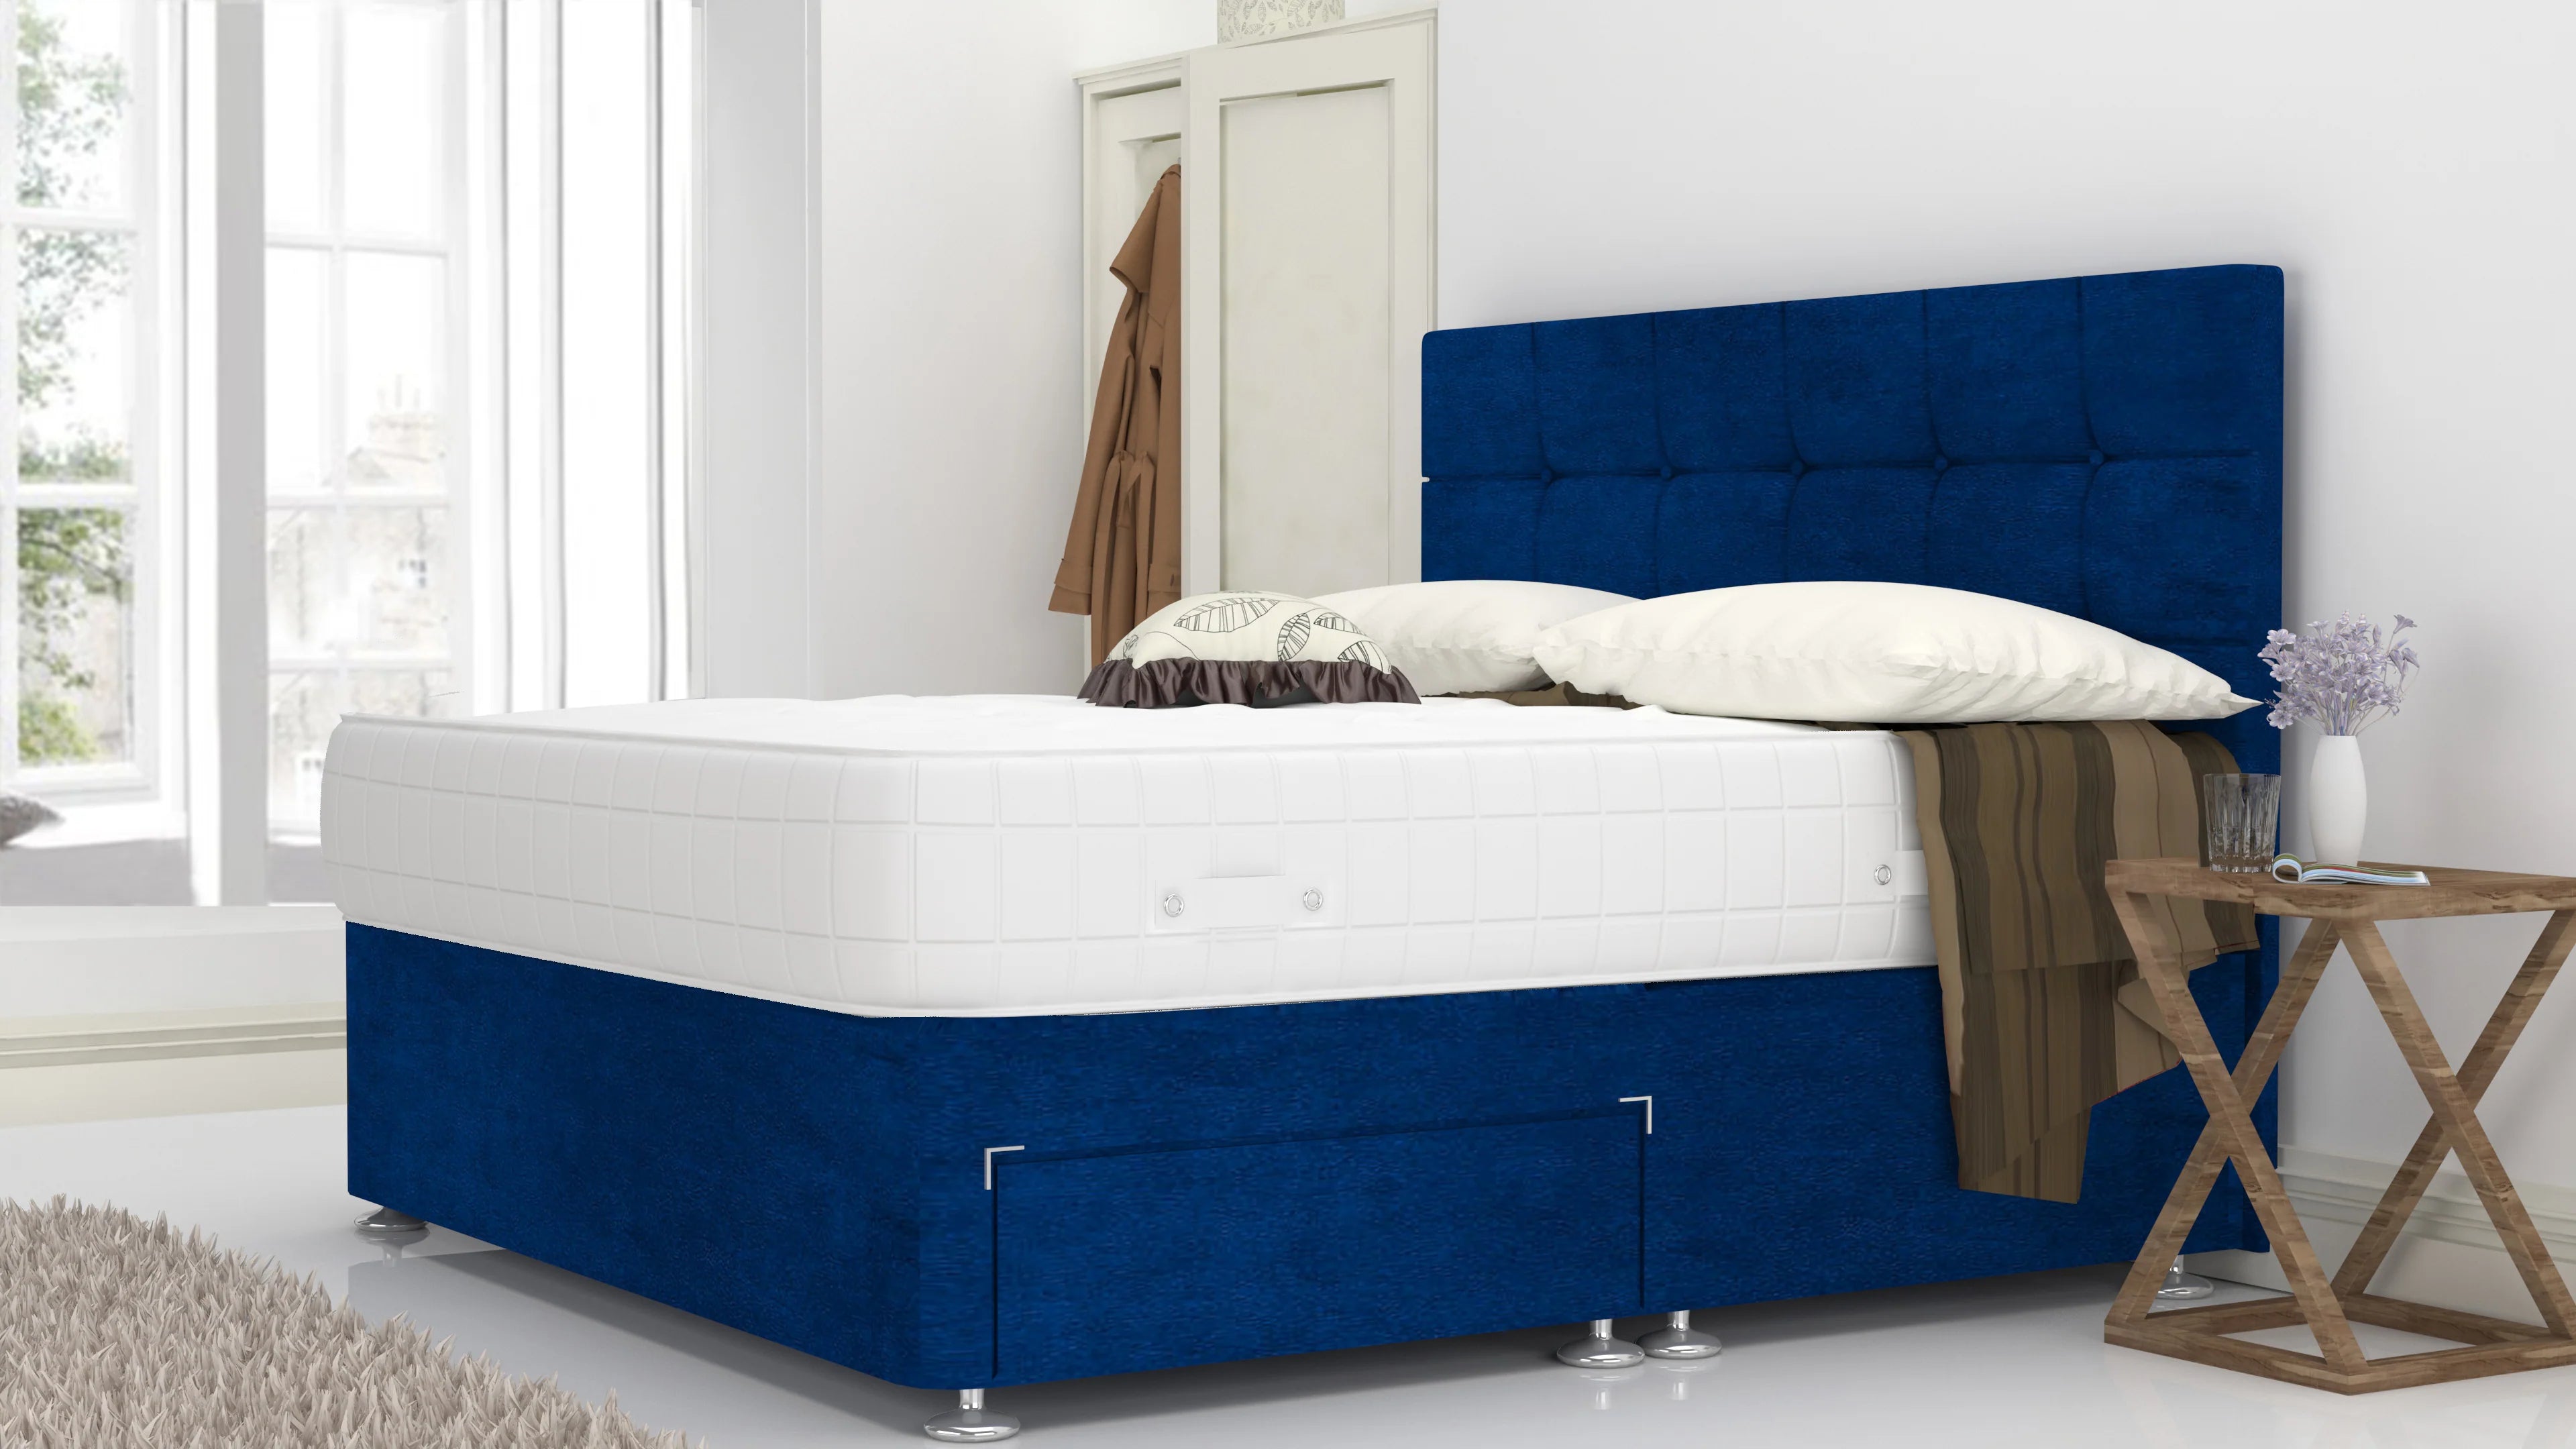 Blue Plush 3 Feet Divan Bed Set With Cube Headboard (Included Feet) And Free Orthopedic Mattress